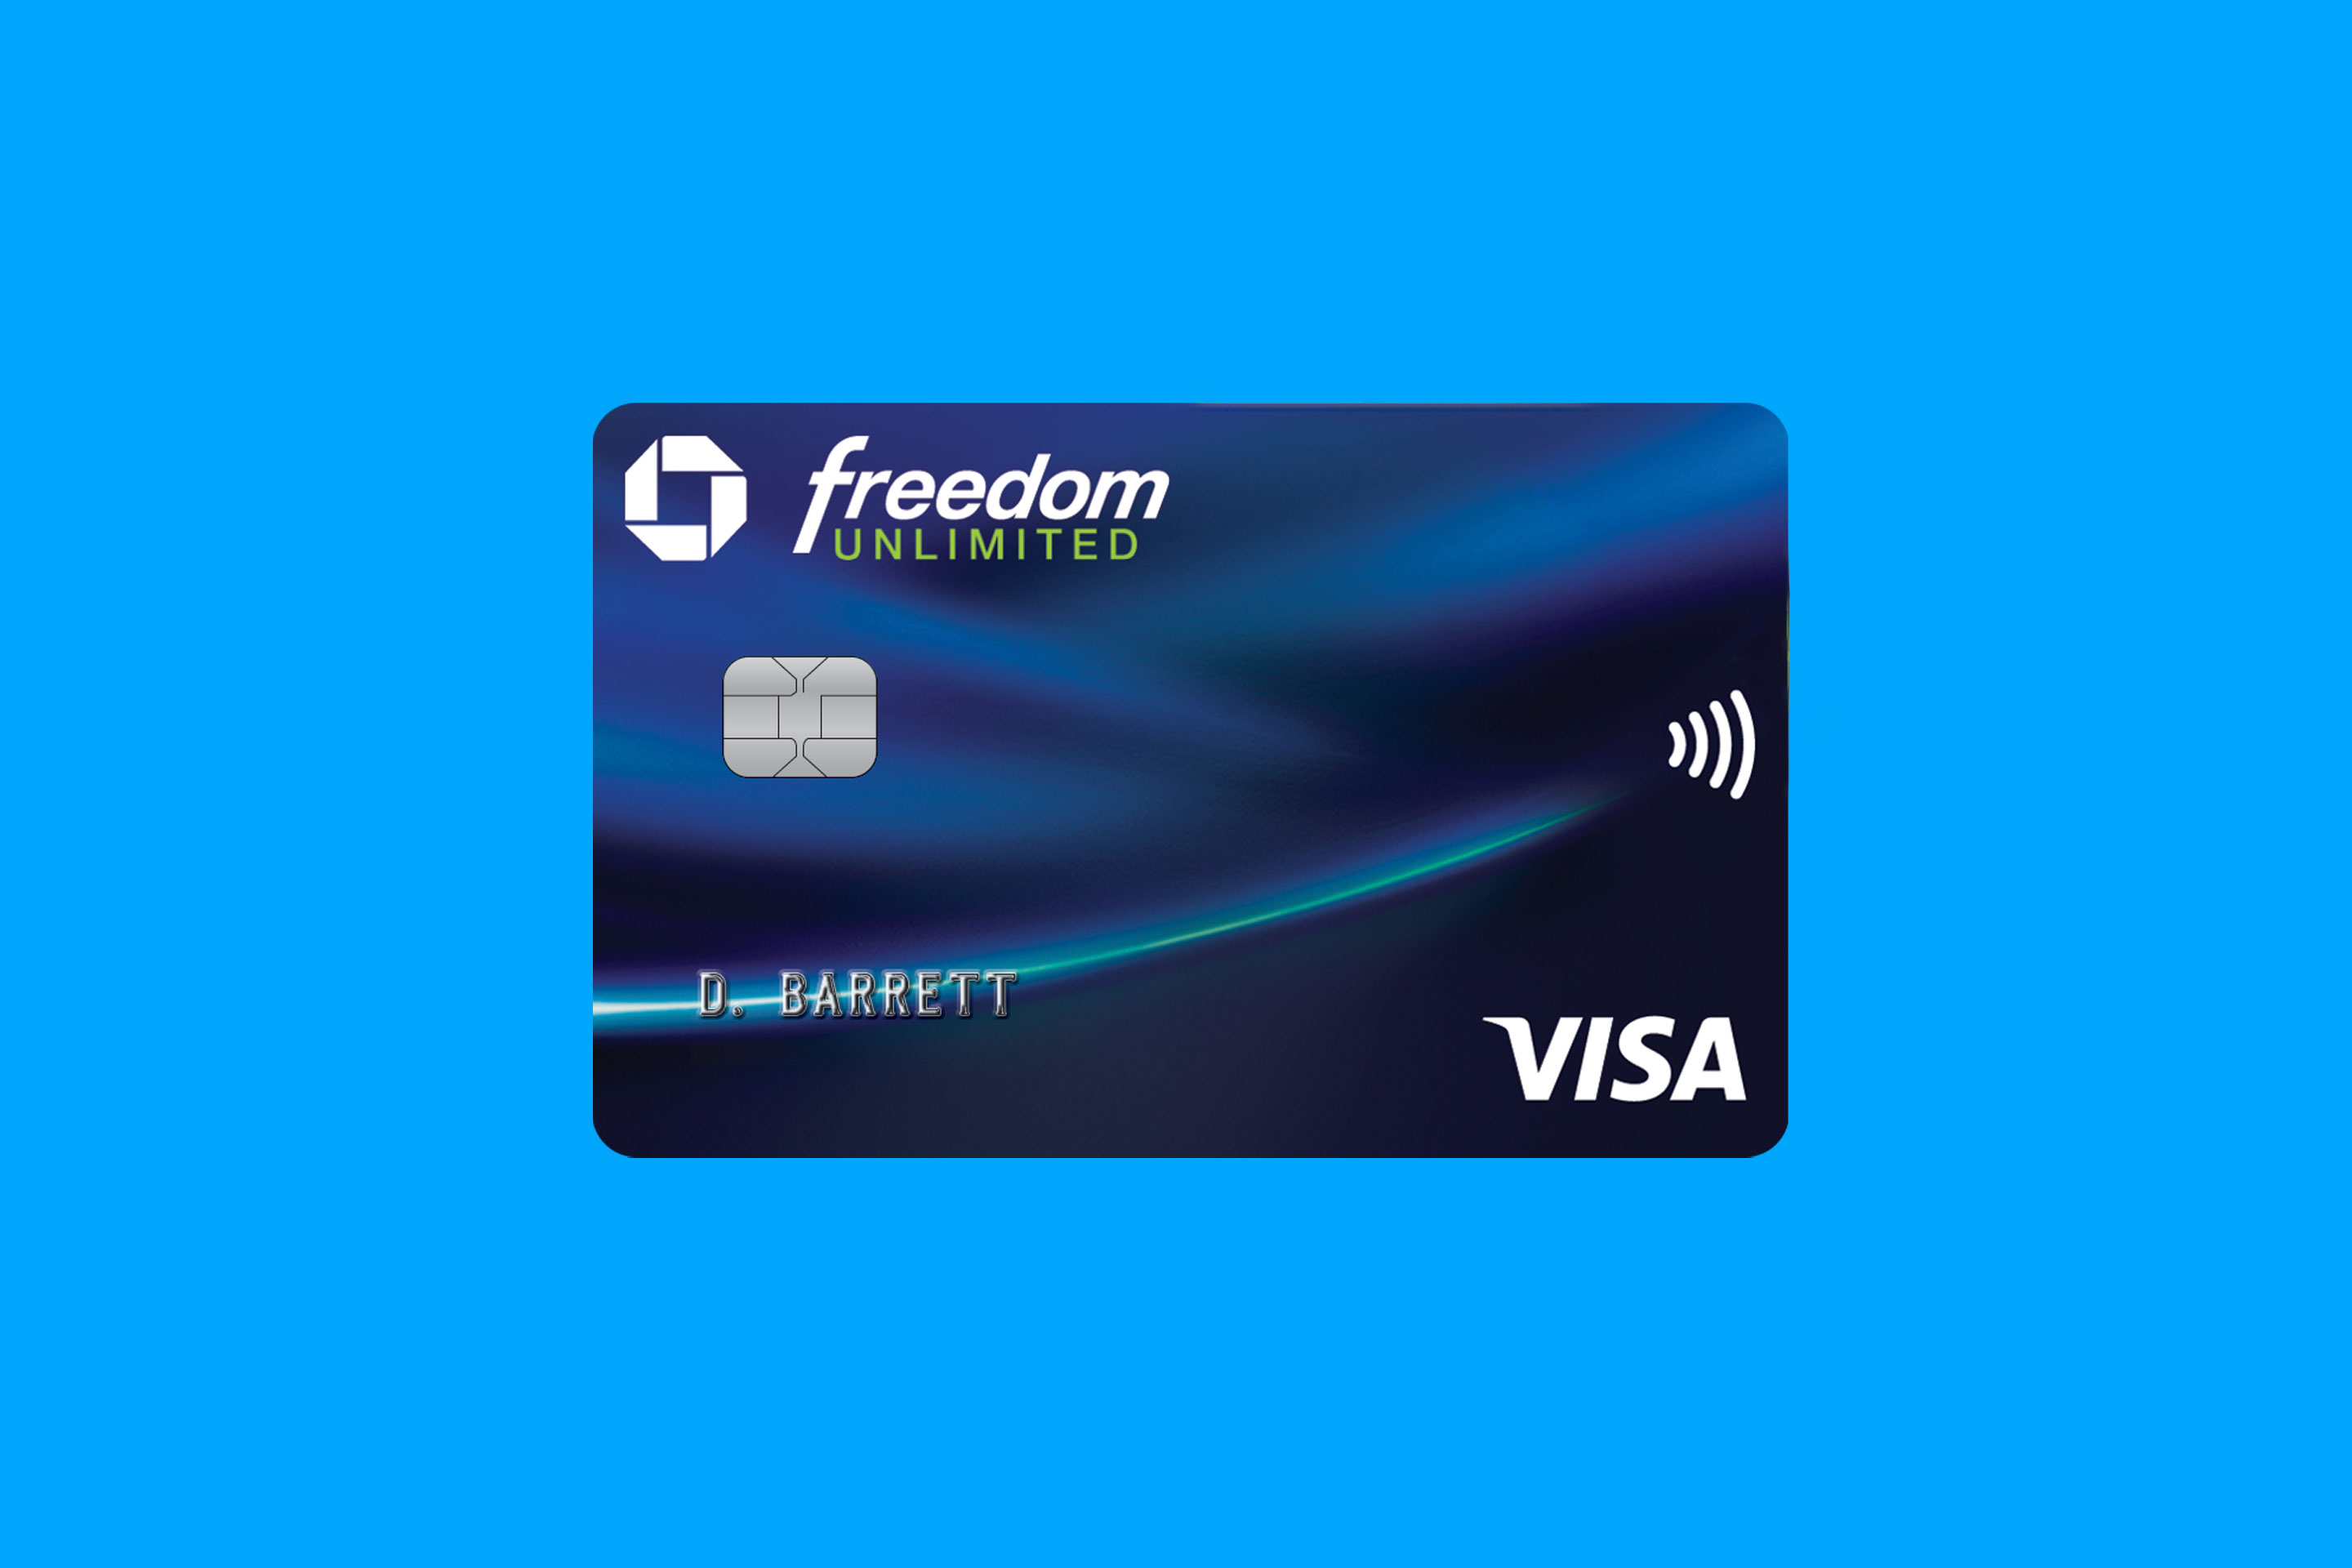 chase dom card payment address